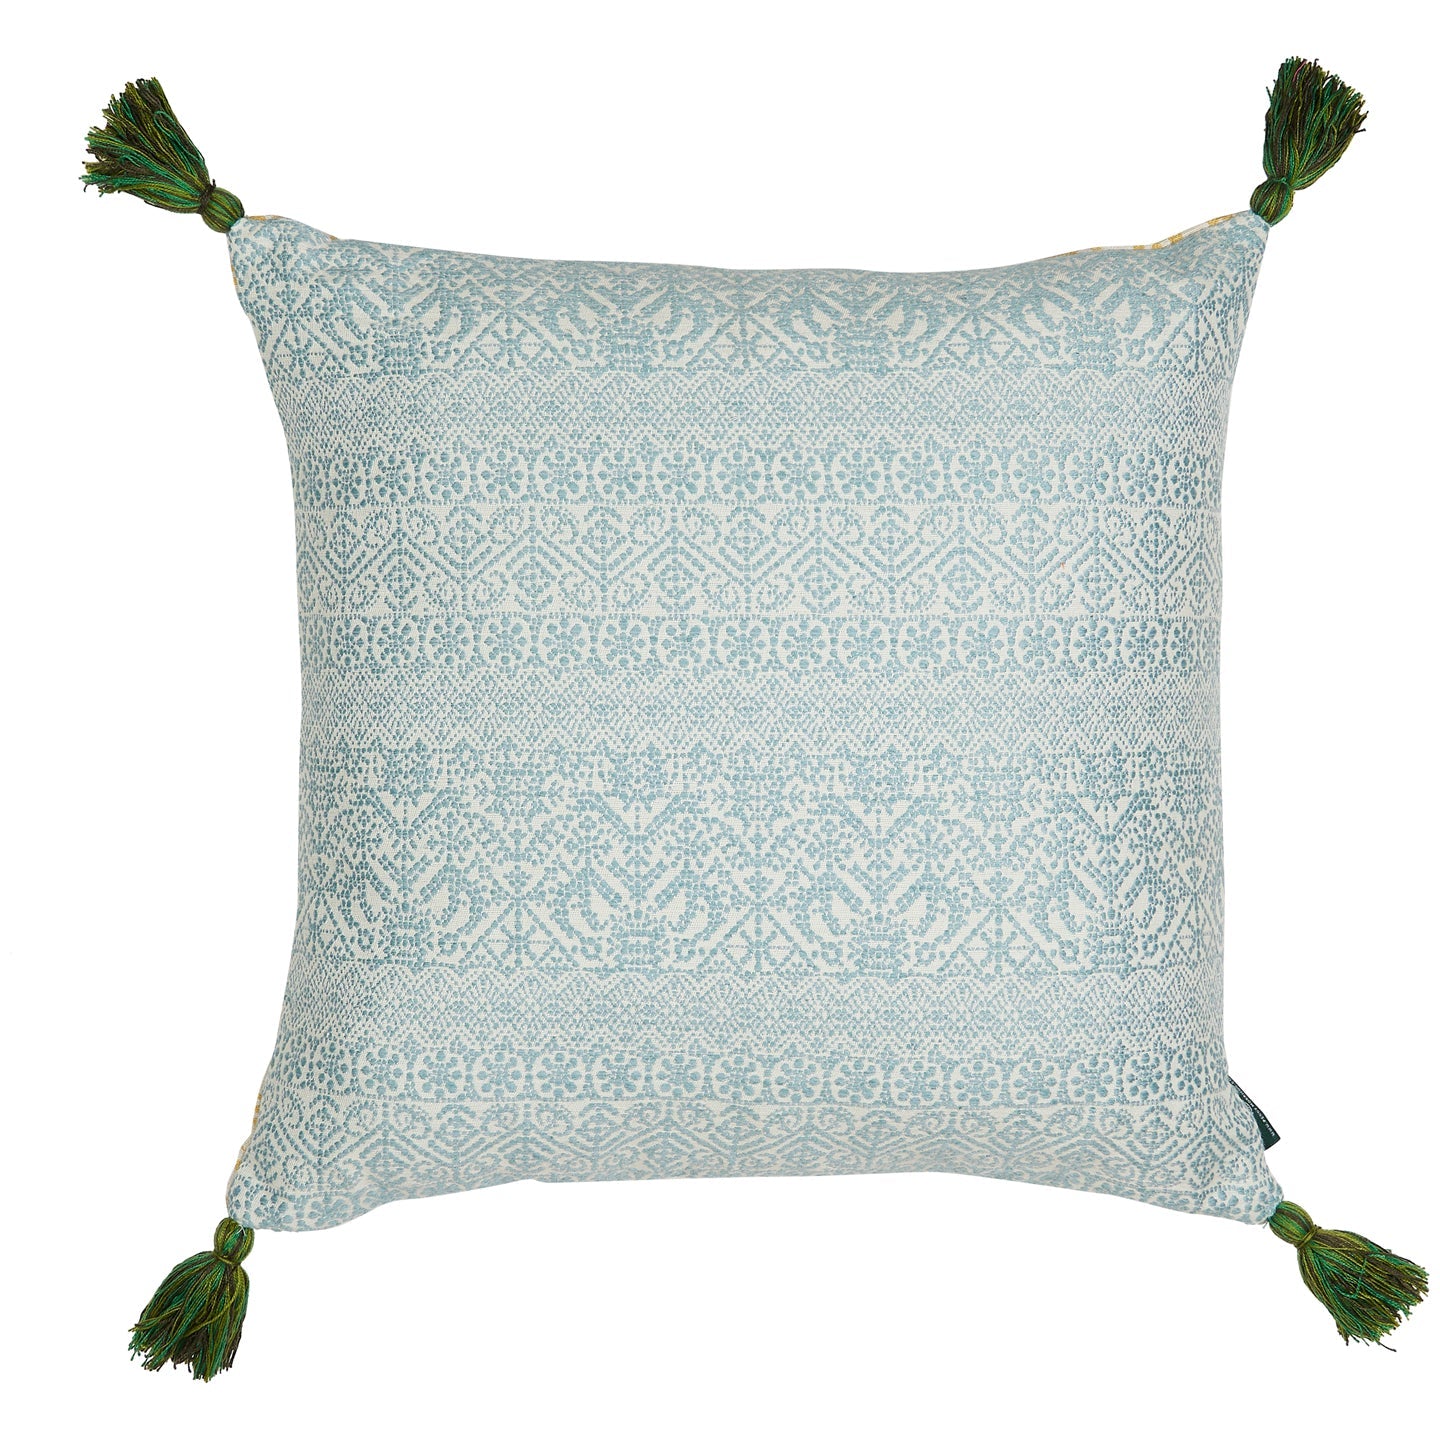 Buriam Light Blue and Ashok Yellow Cushion with Green Tassels